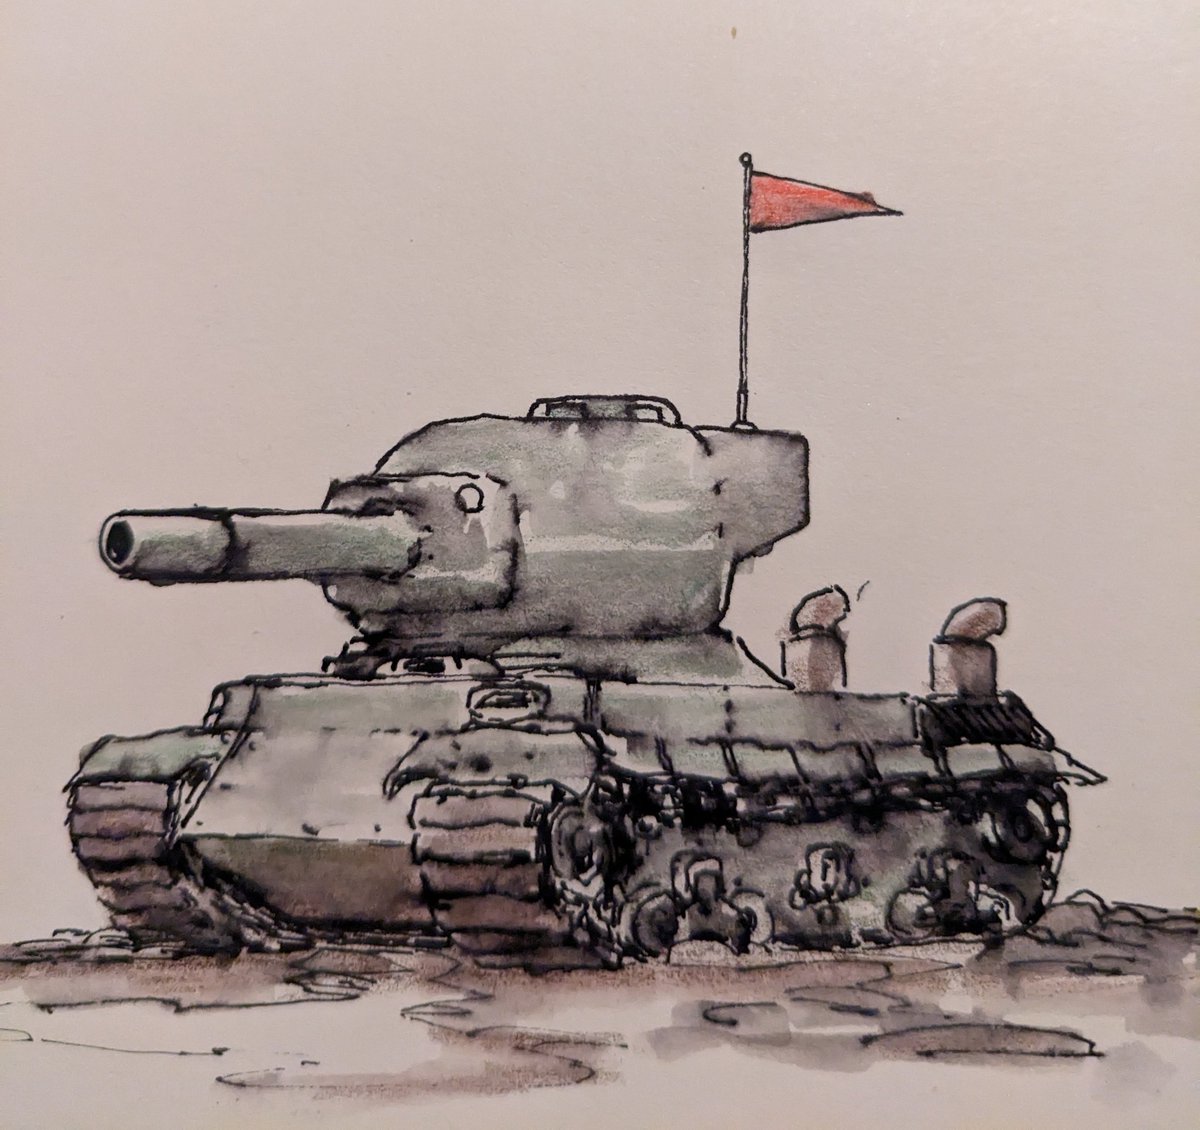 「Drew a little tank for my nephew for chr」|Mike Franchinaのイラスト